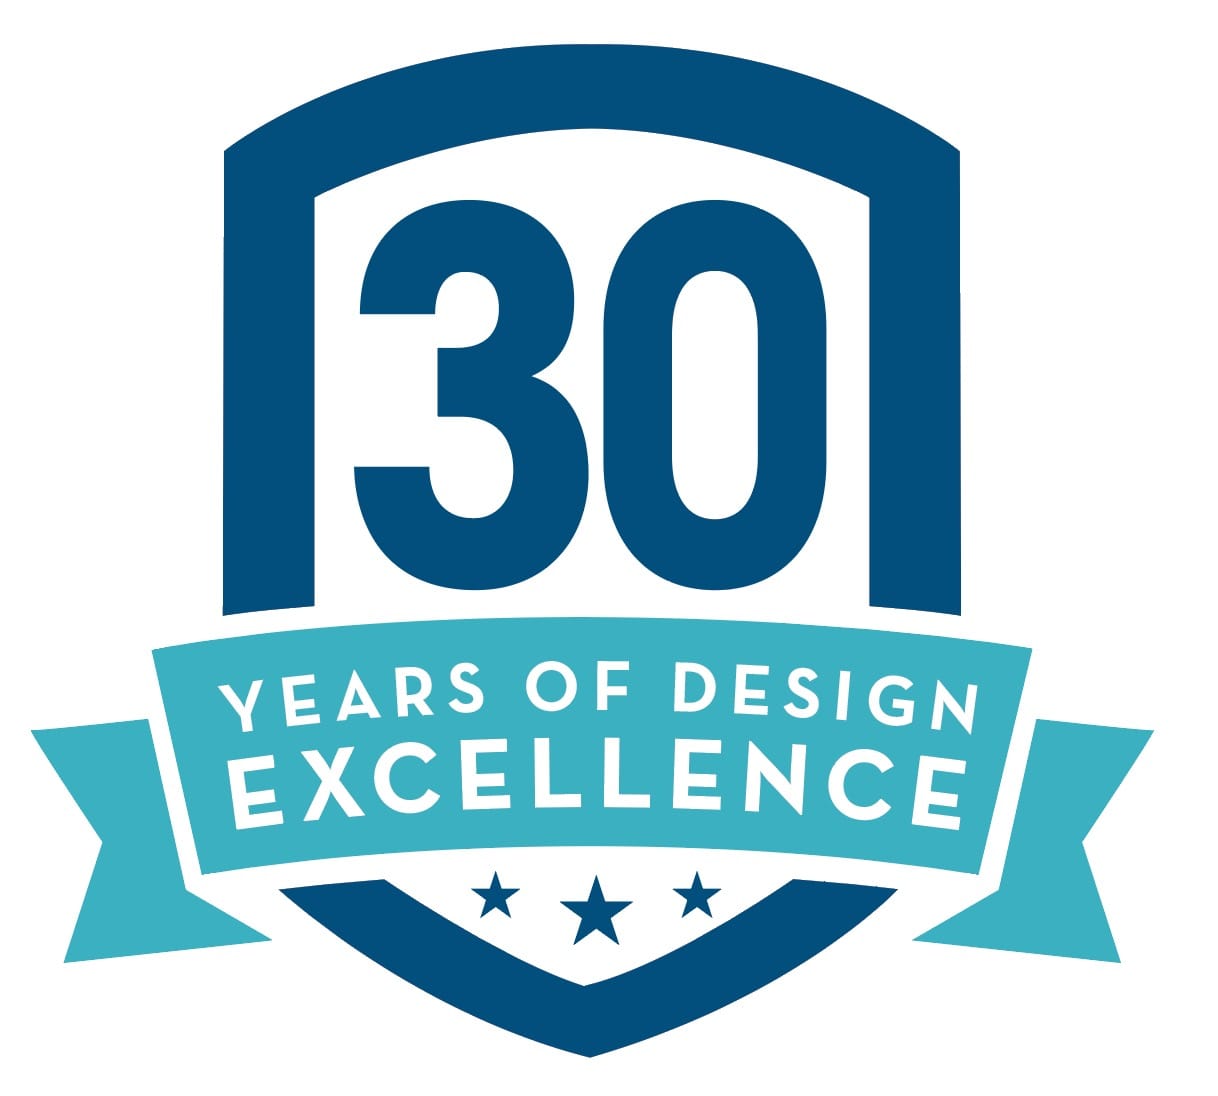 30 Years of Design Excellence Award